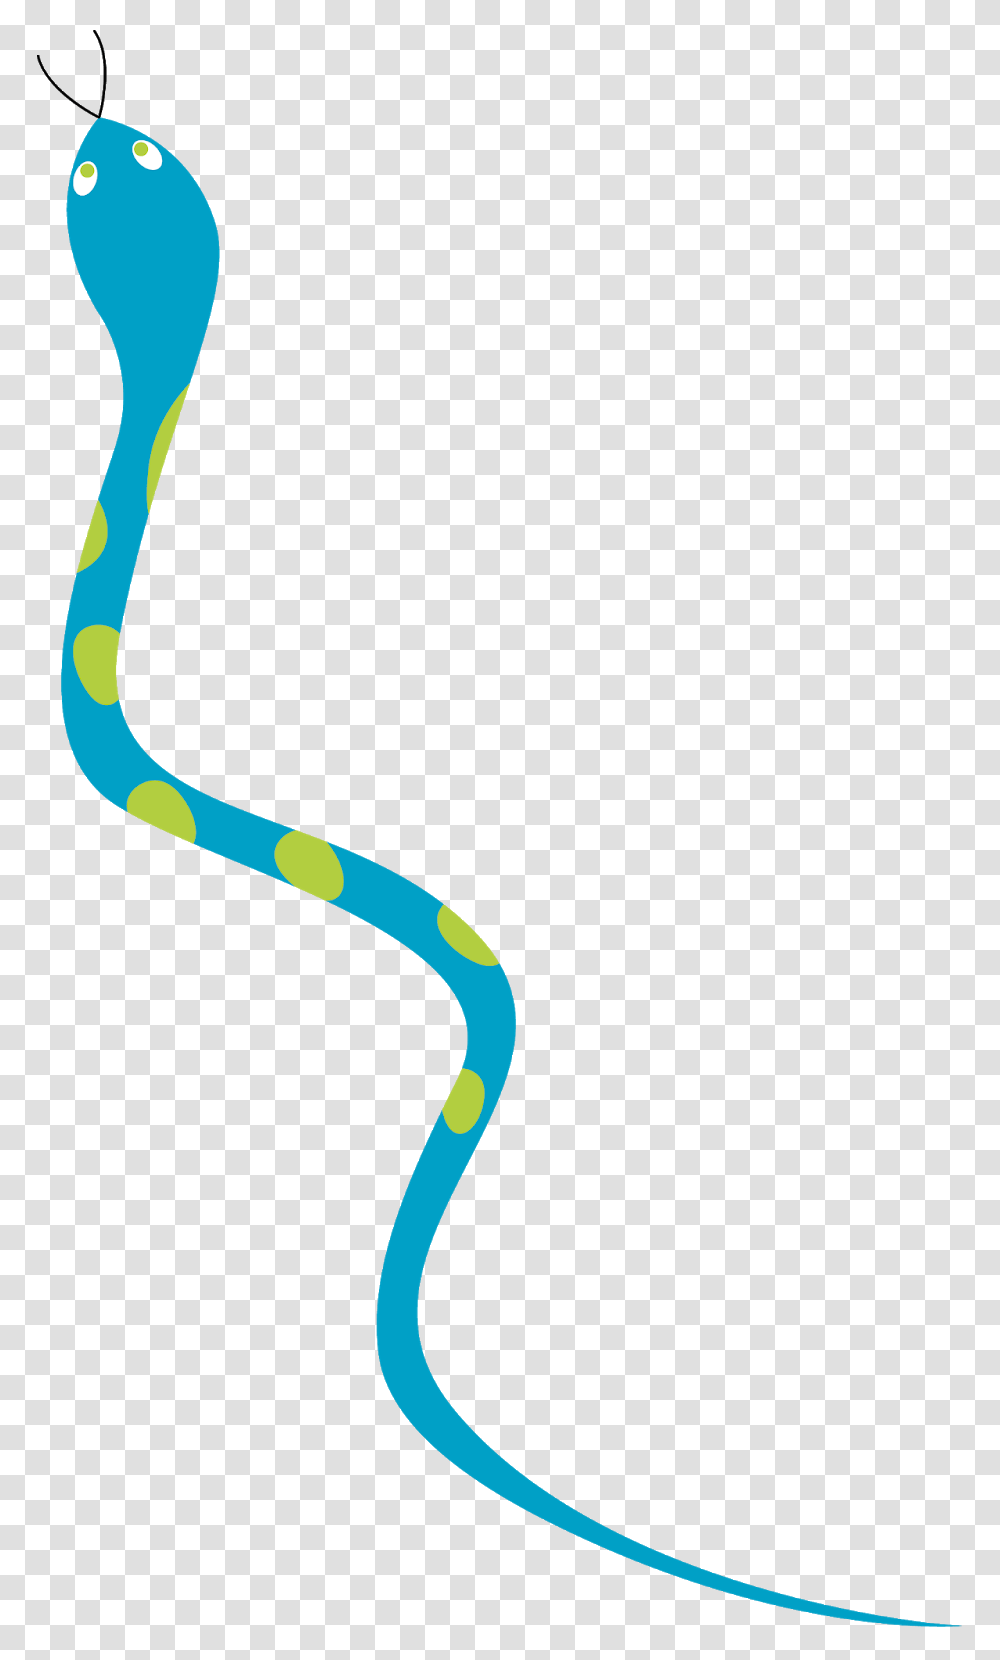 Snake Clip Art For Snake And Ladder, Reptile, Animal, Sea Snake, Sea Life Transparent Png